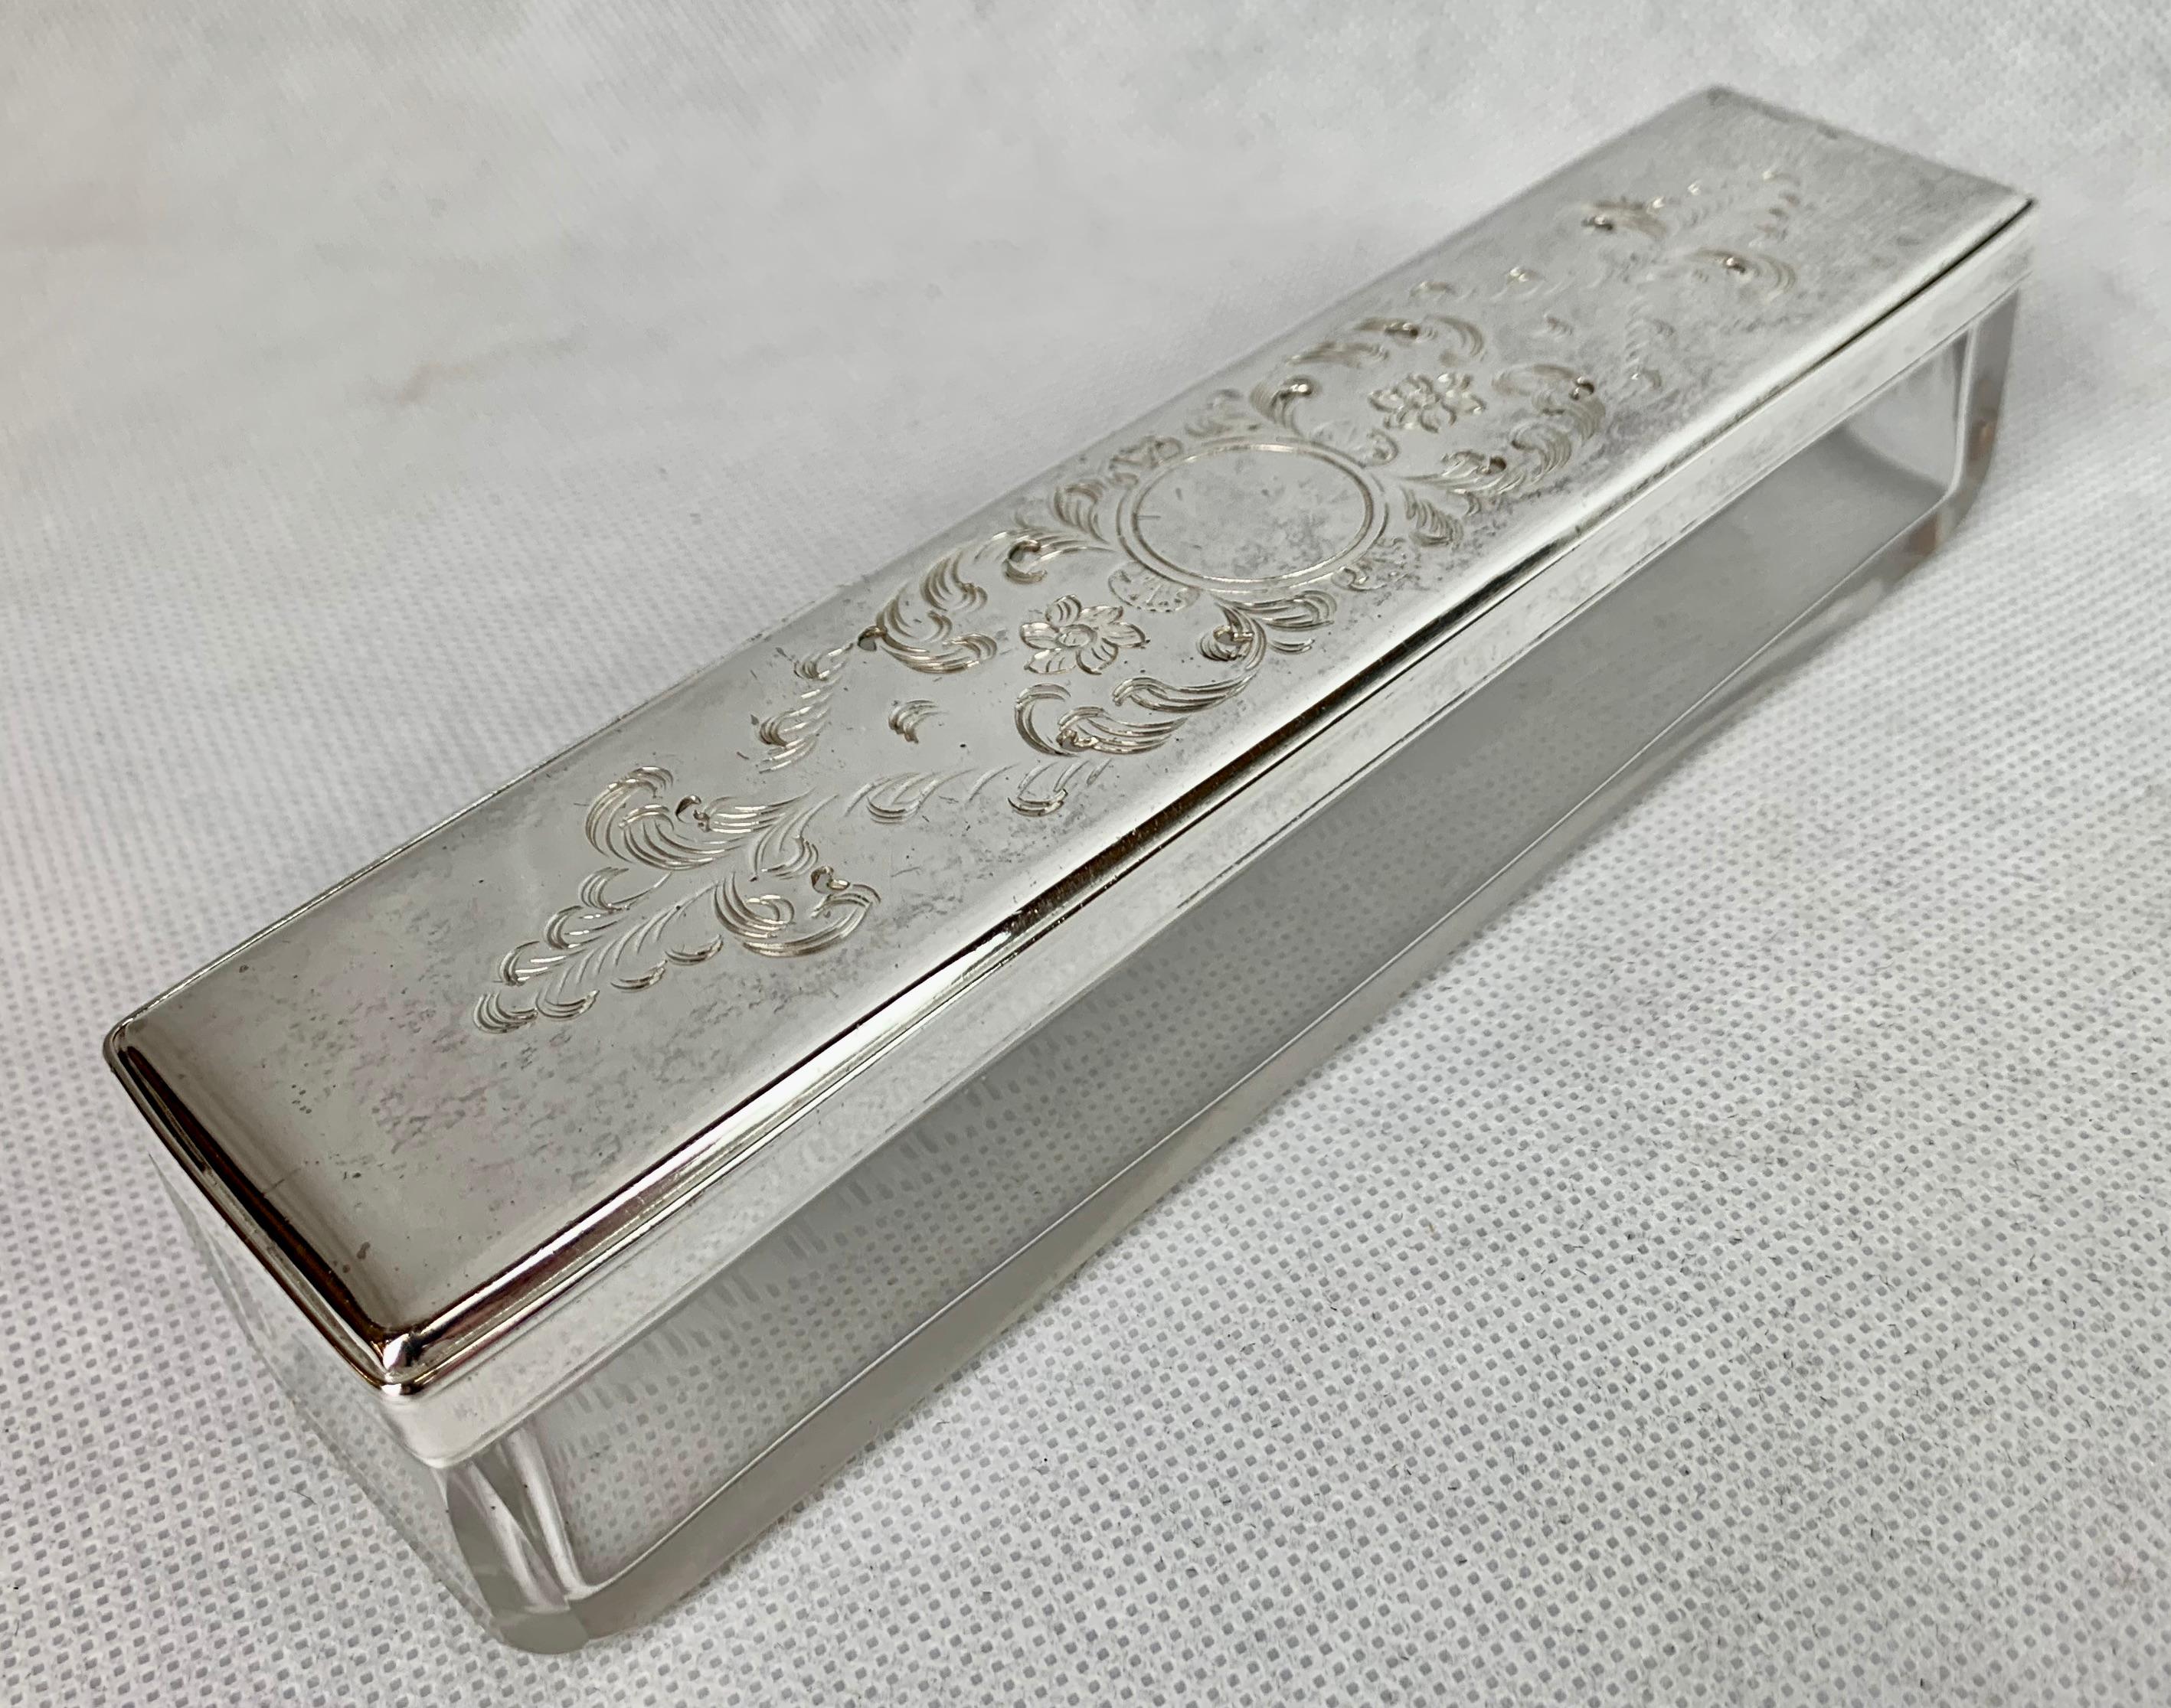 Victorian glass box with a pierced silver plated cover. Originally found in a fitted travel vanity case. The top appears to be hand engraved. This box is in like new condition, so why not use it on your desk for pencils, paper clips, rubber bands.